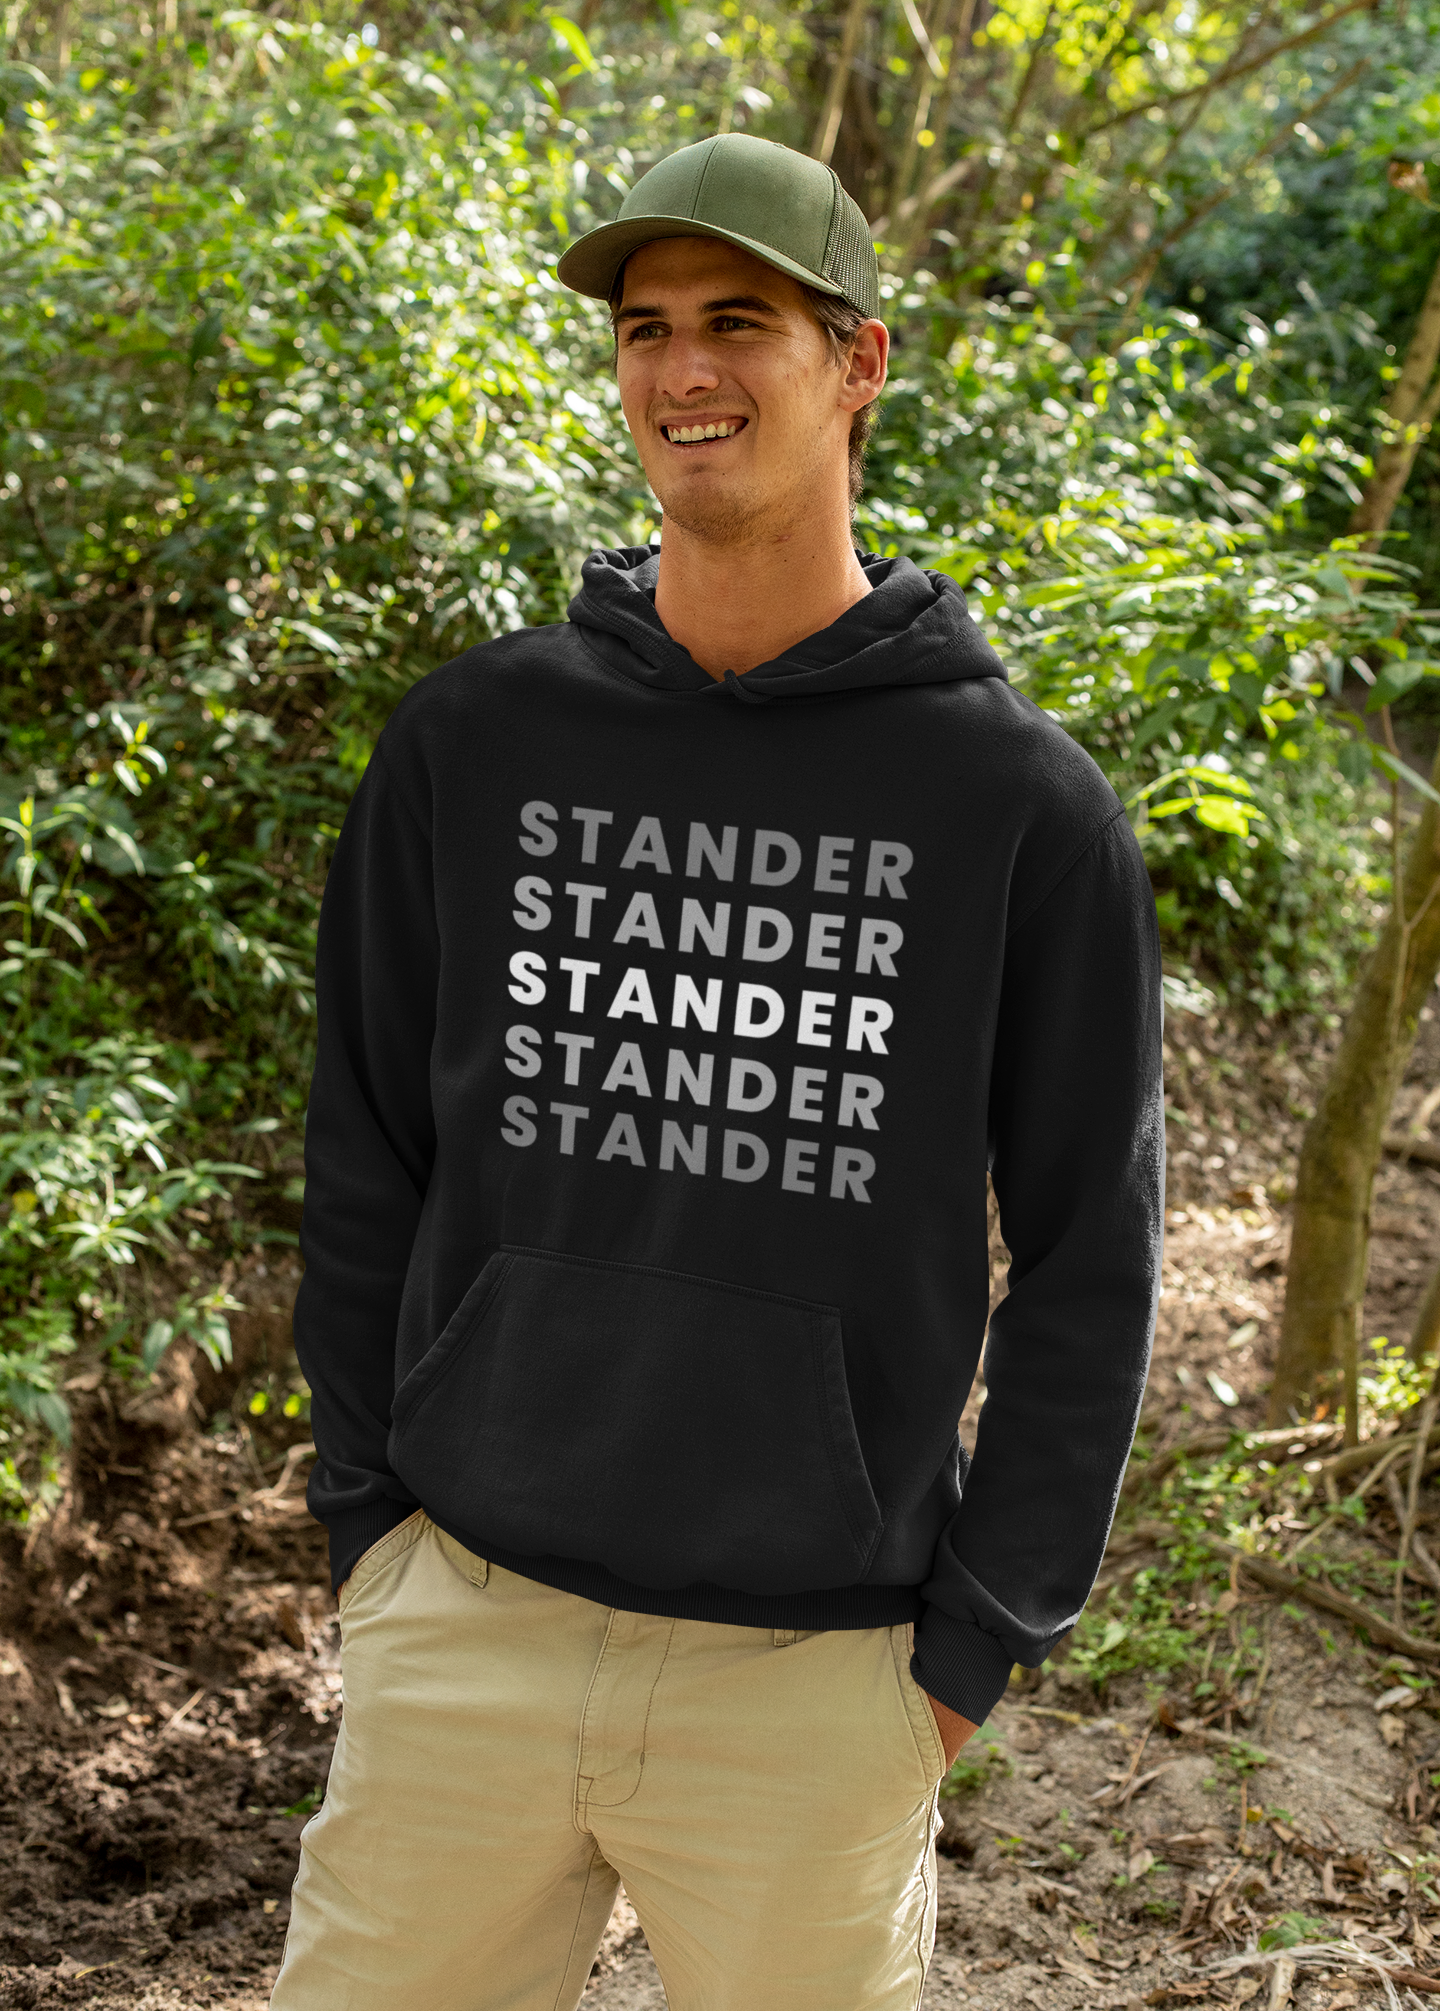 "Stander" - Hooded Sweatshirt t (Light Blue, Black, & Red Available)